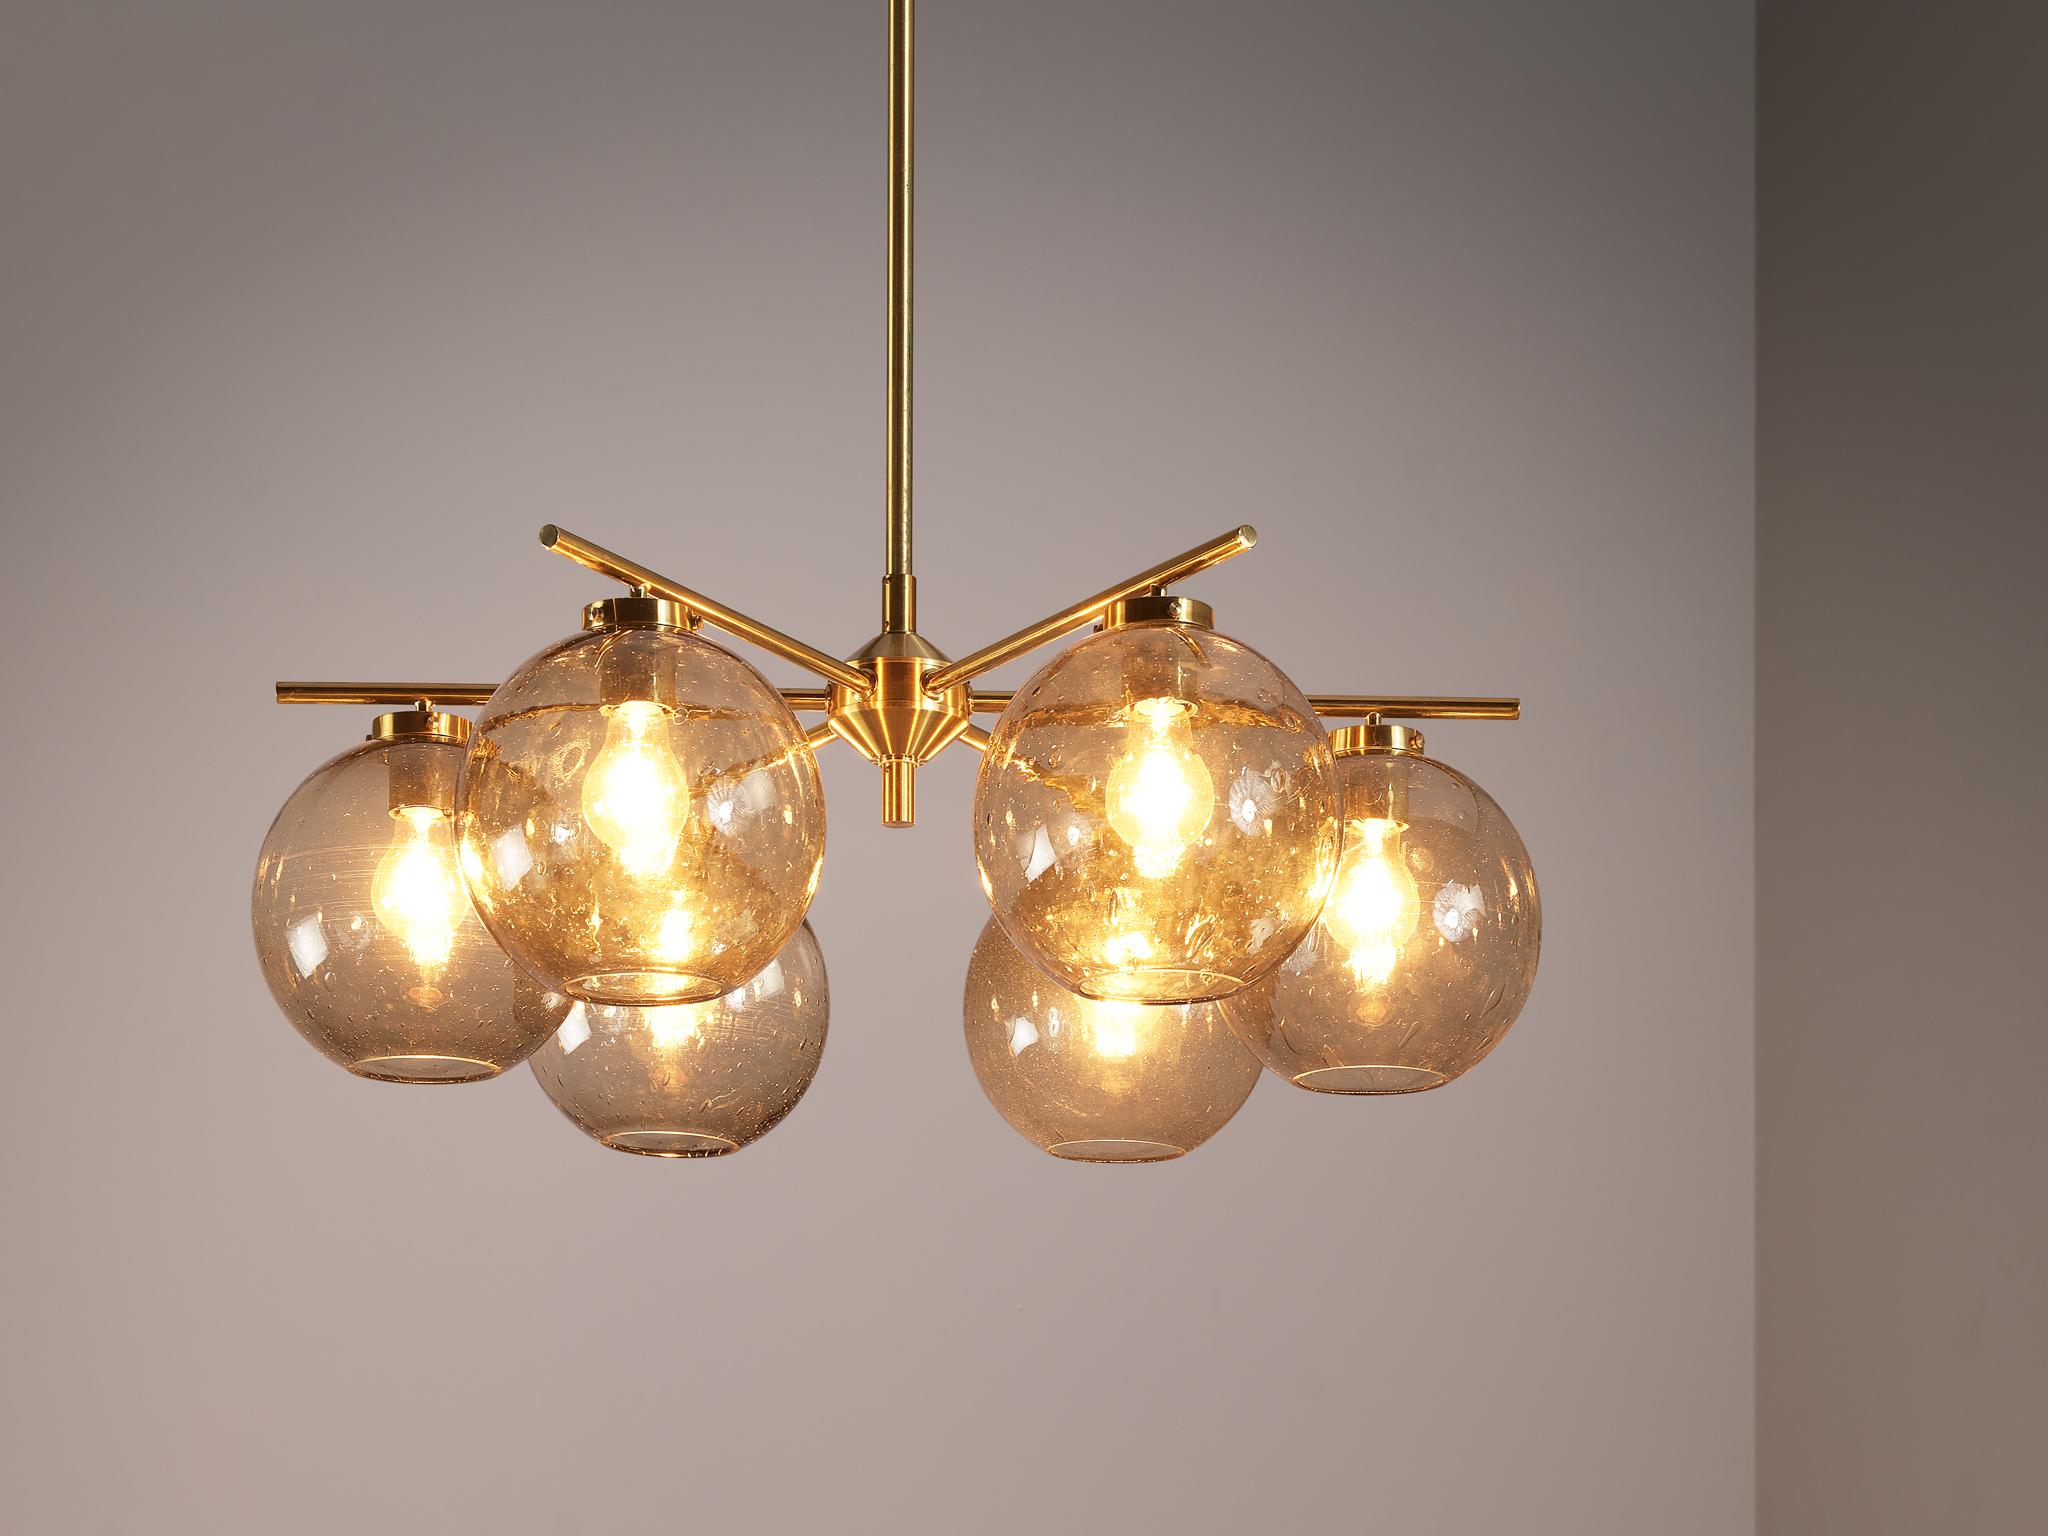 Mid-20th Century Holger Johansson for Westal Chandeliers in Brass and Smoked Glass  For Sale